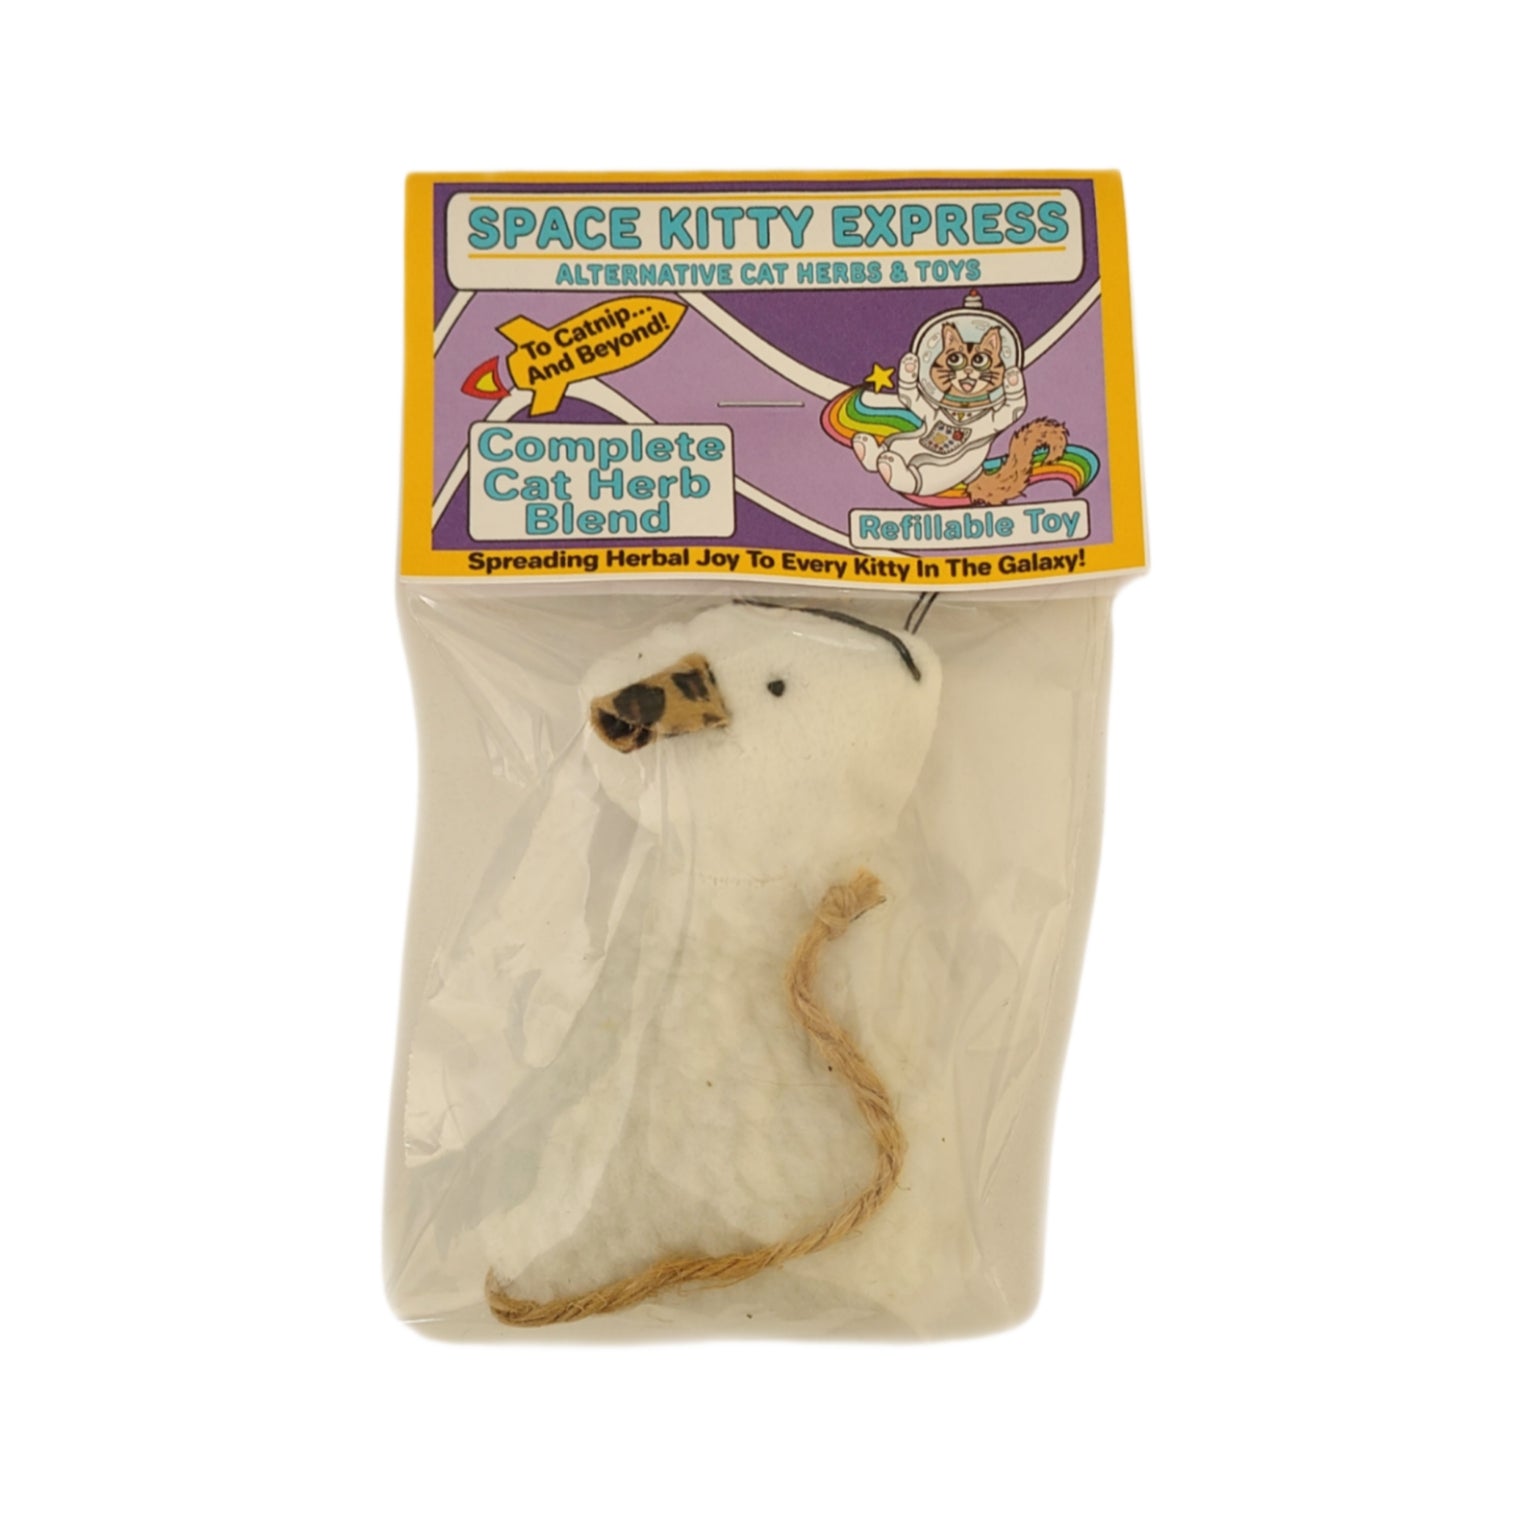 Refillable White Sherpa Mouse with Complete Herb Blend by Space Kitty Express